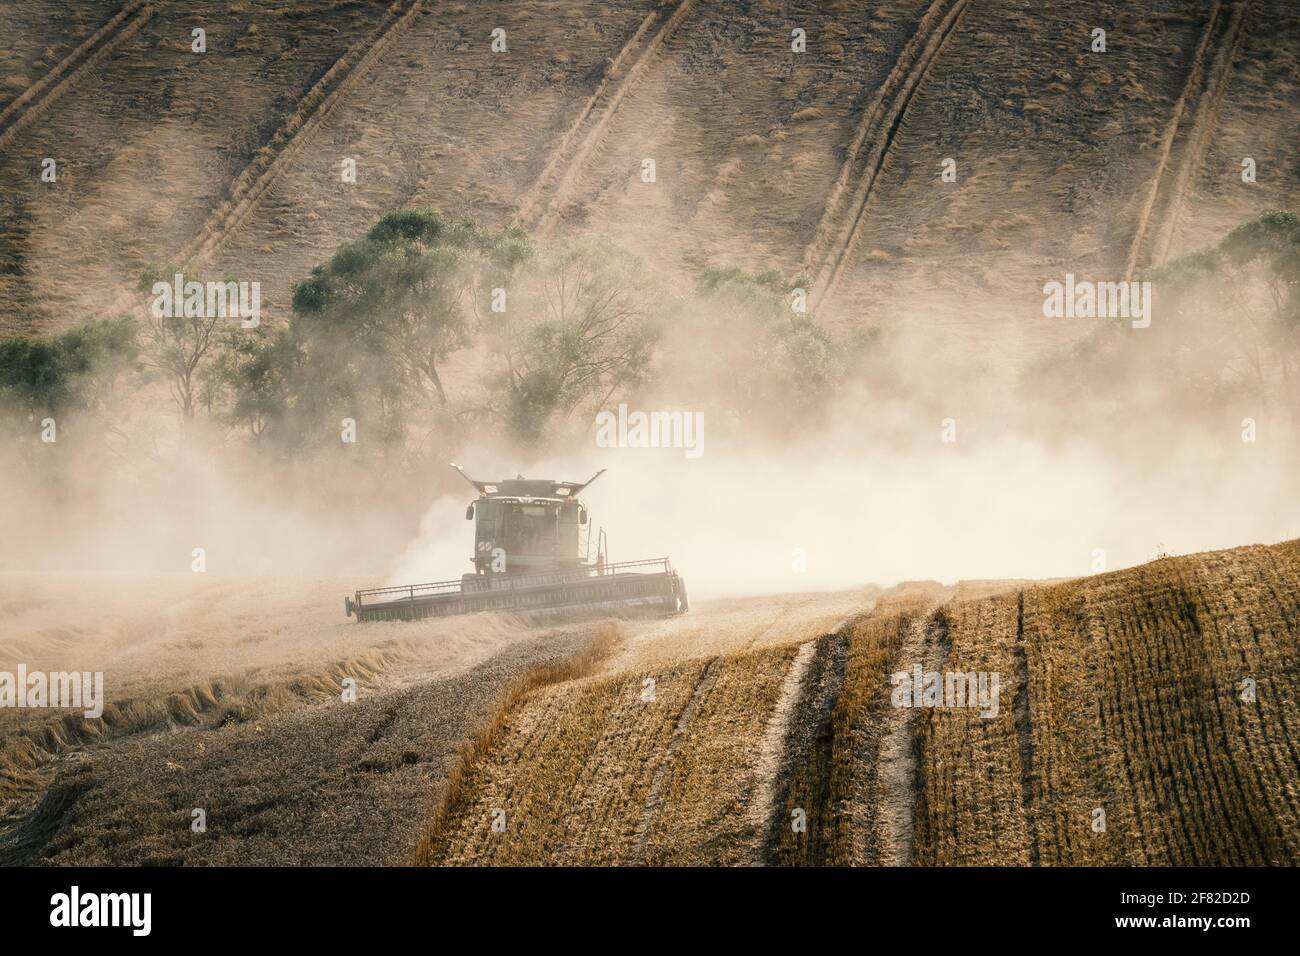 Combine harvester cutting cereal plant at agricultural field. Rural scene with agricultural machinery Stock Photo